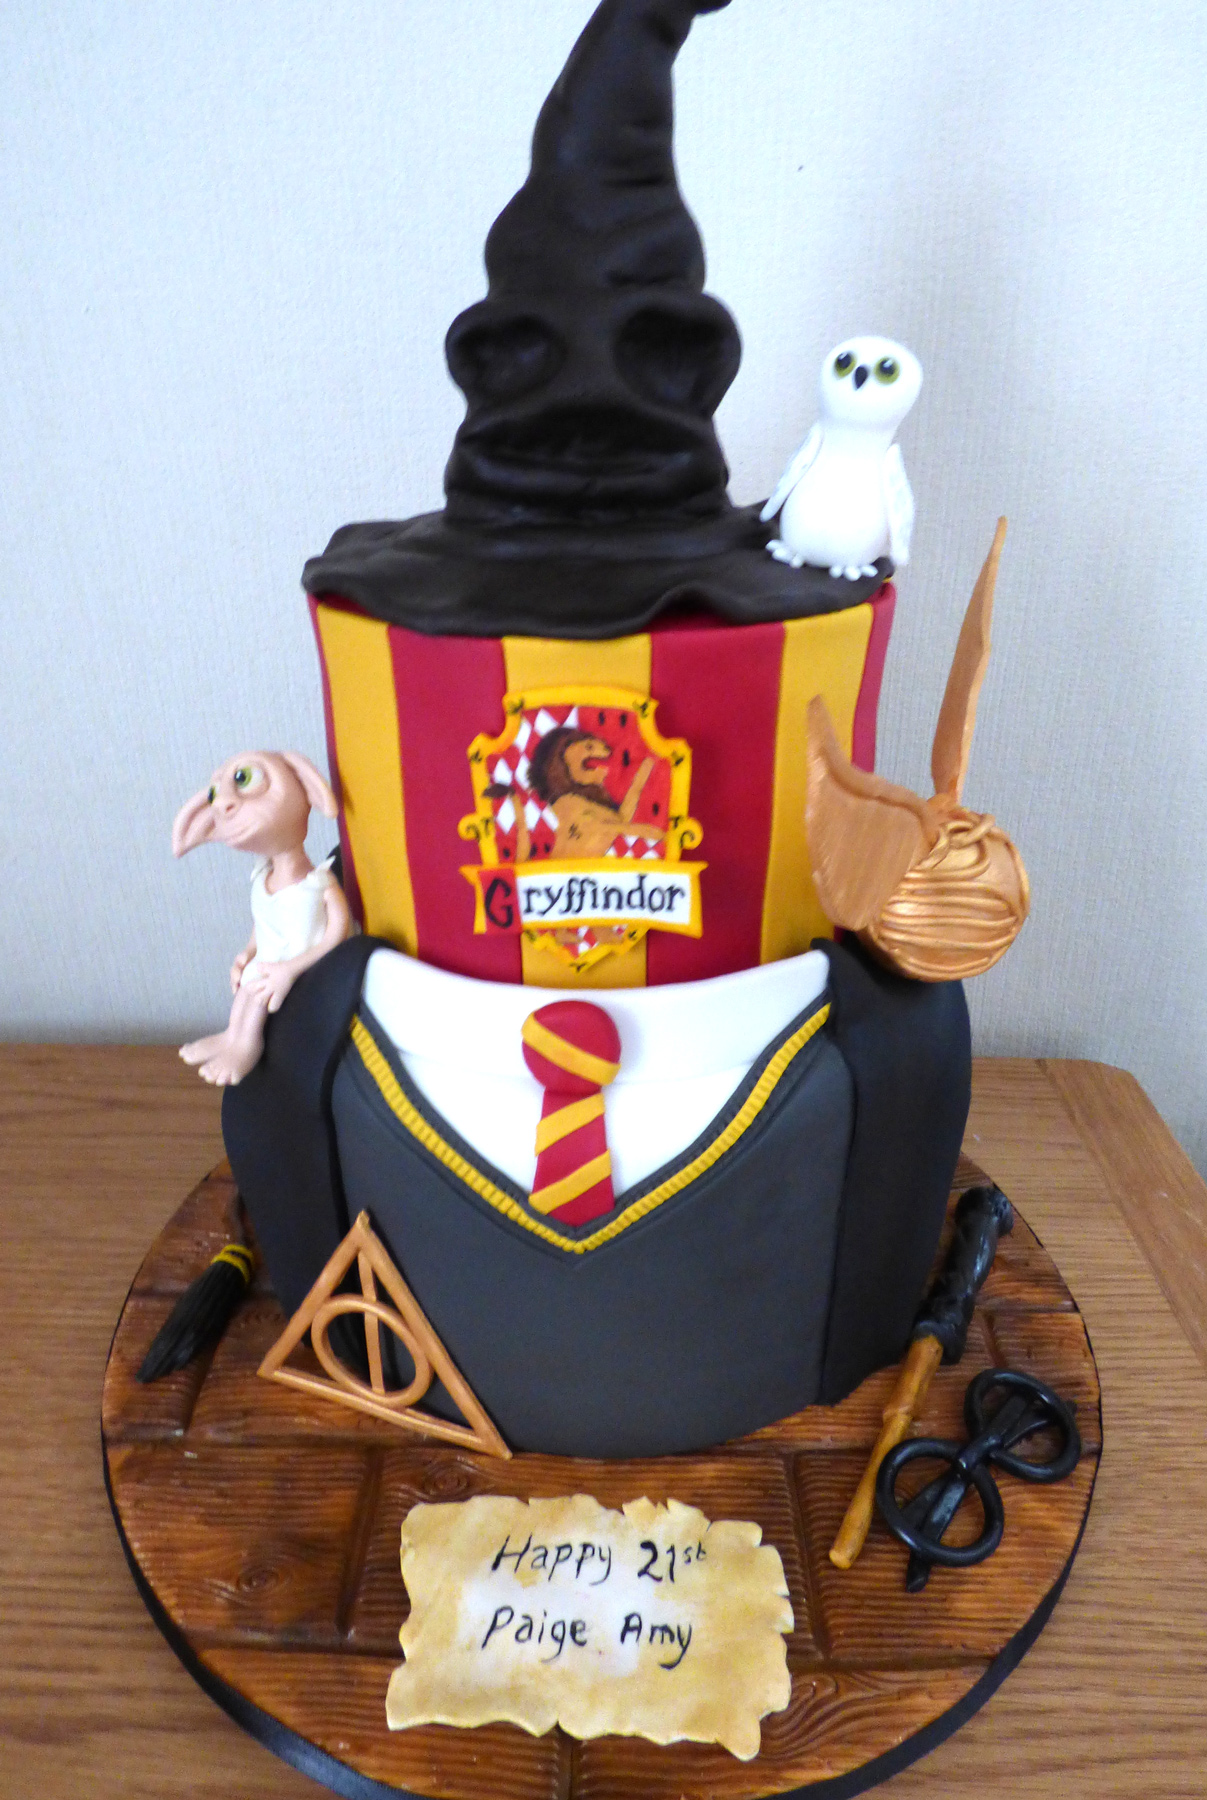 Hagrid's cake for Harry Potter's birthday - Picnic on a Broom